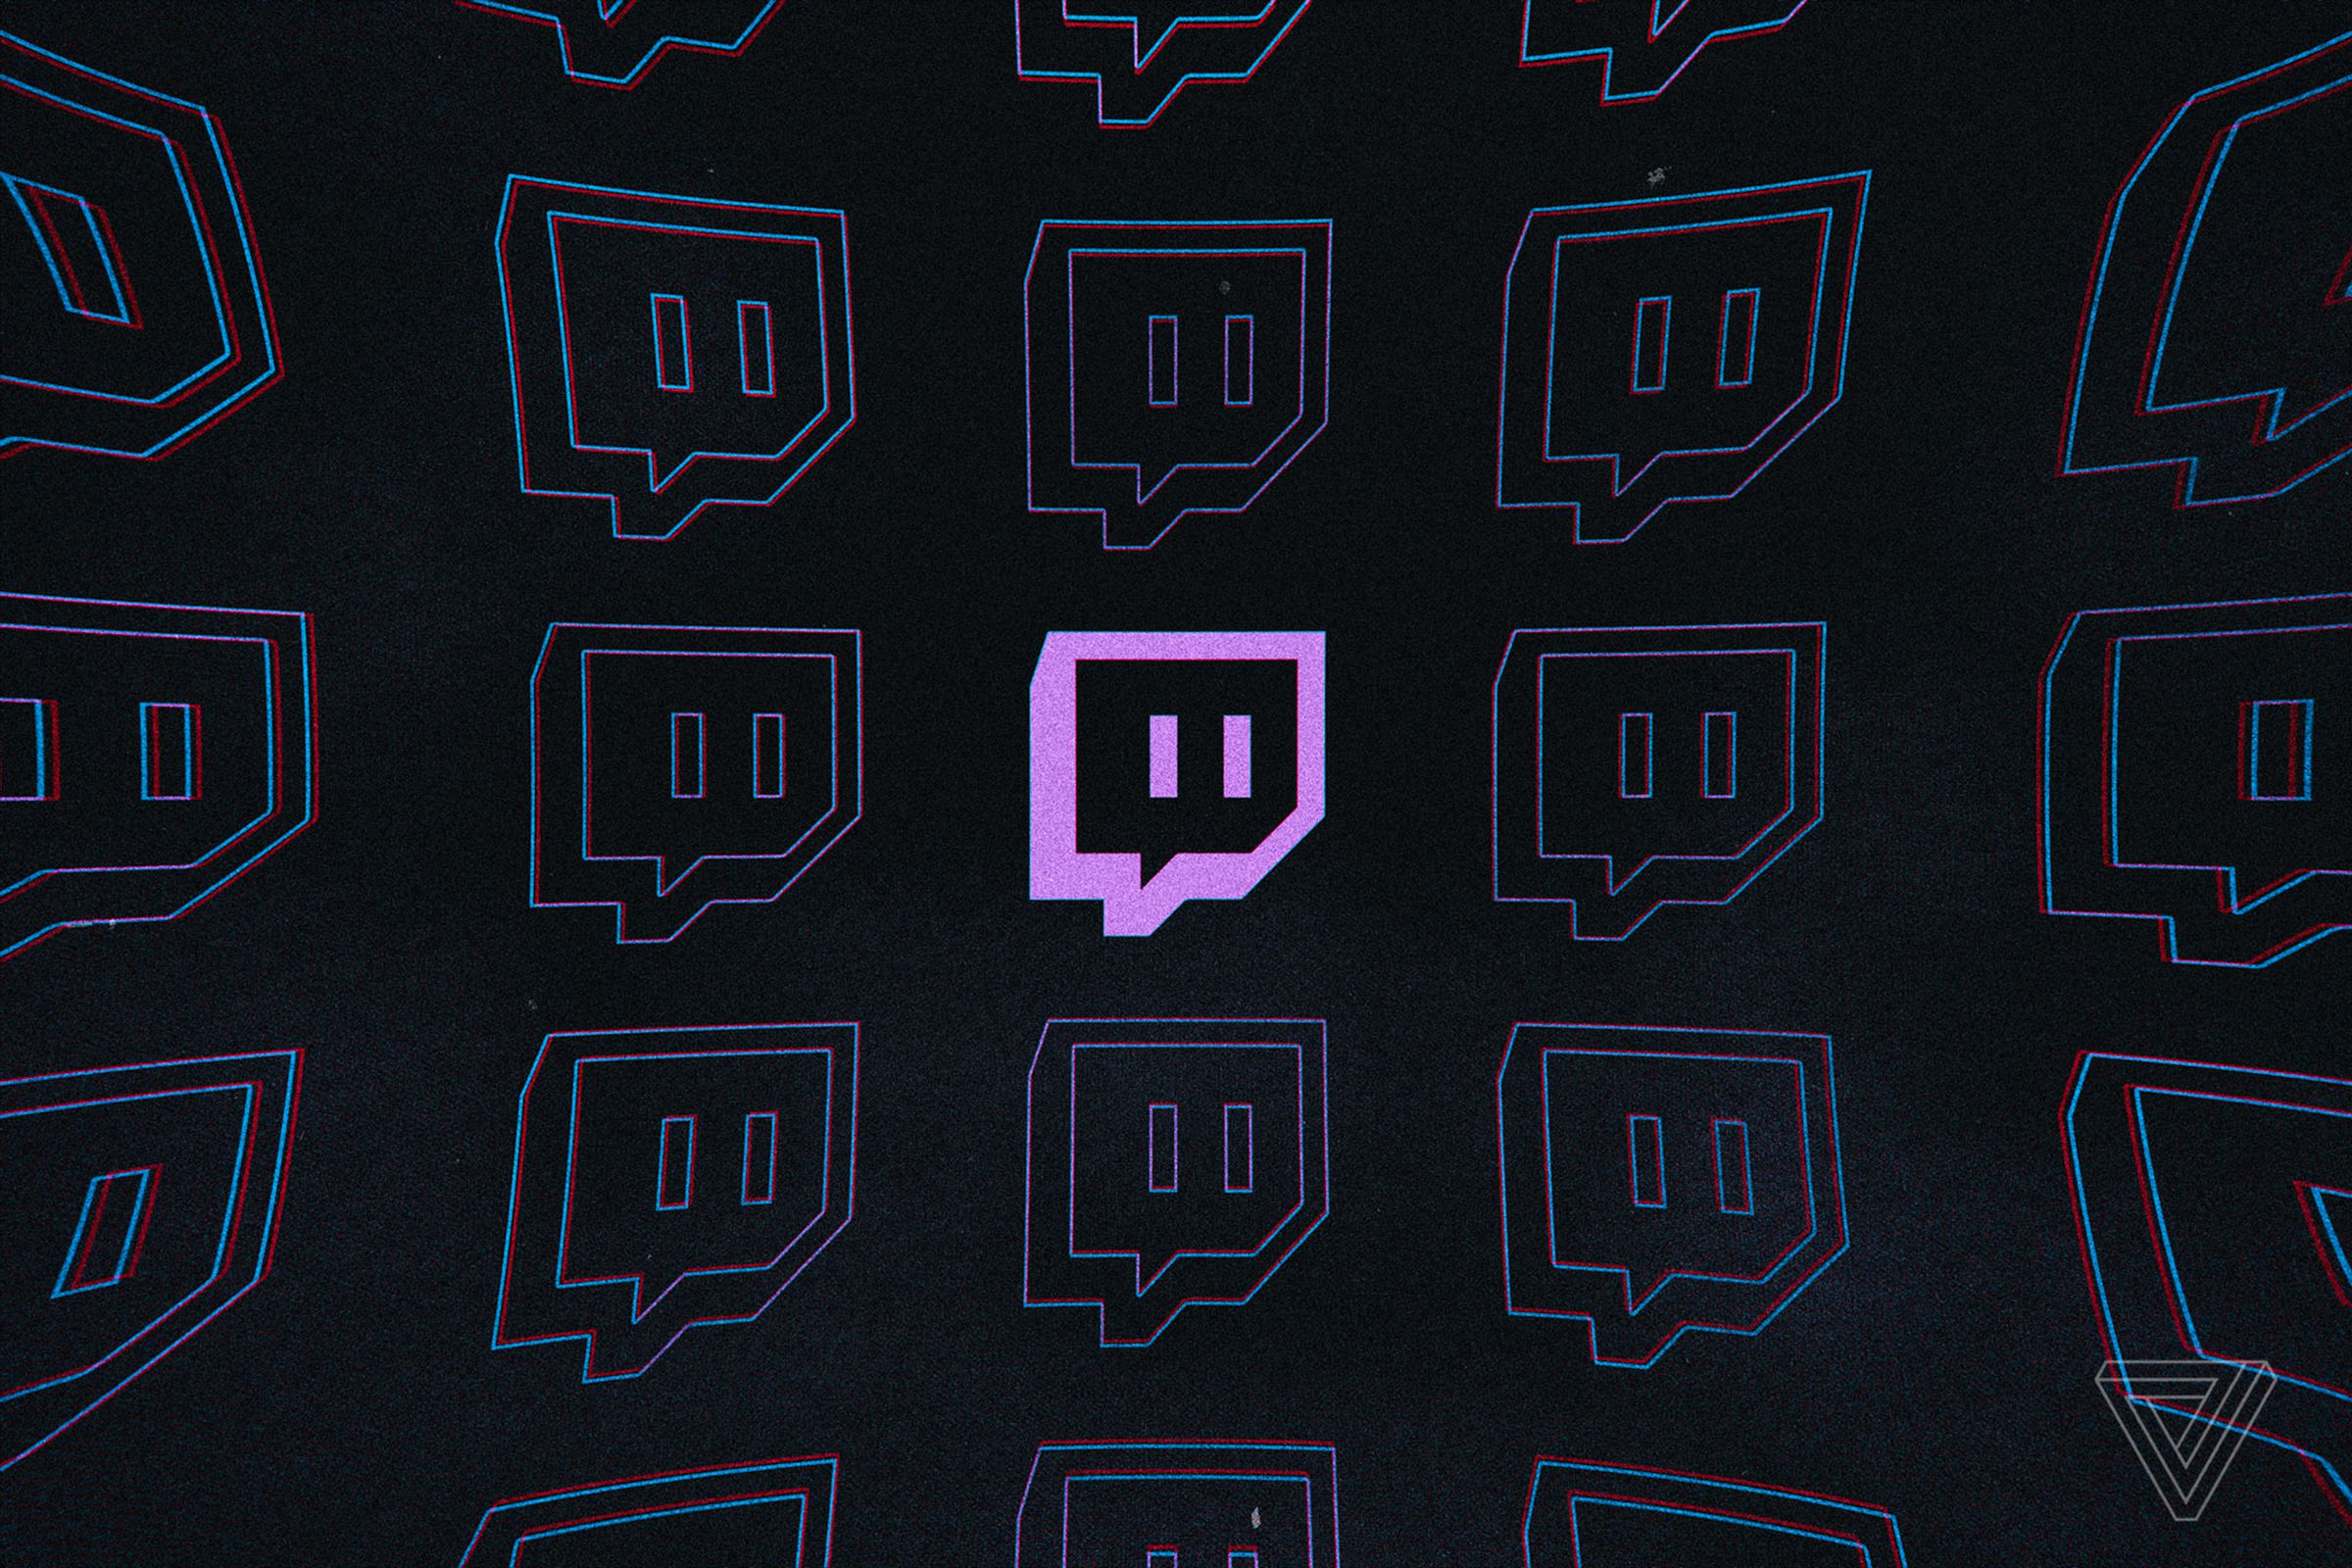 Twitch has updated its usernames policy